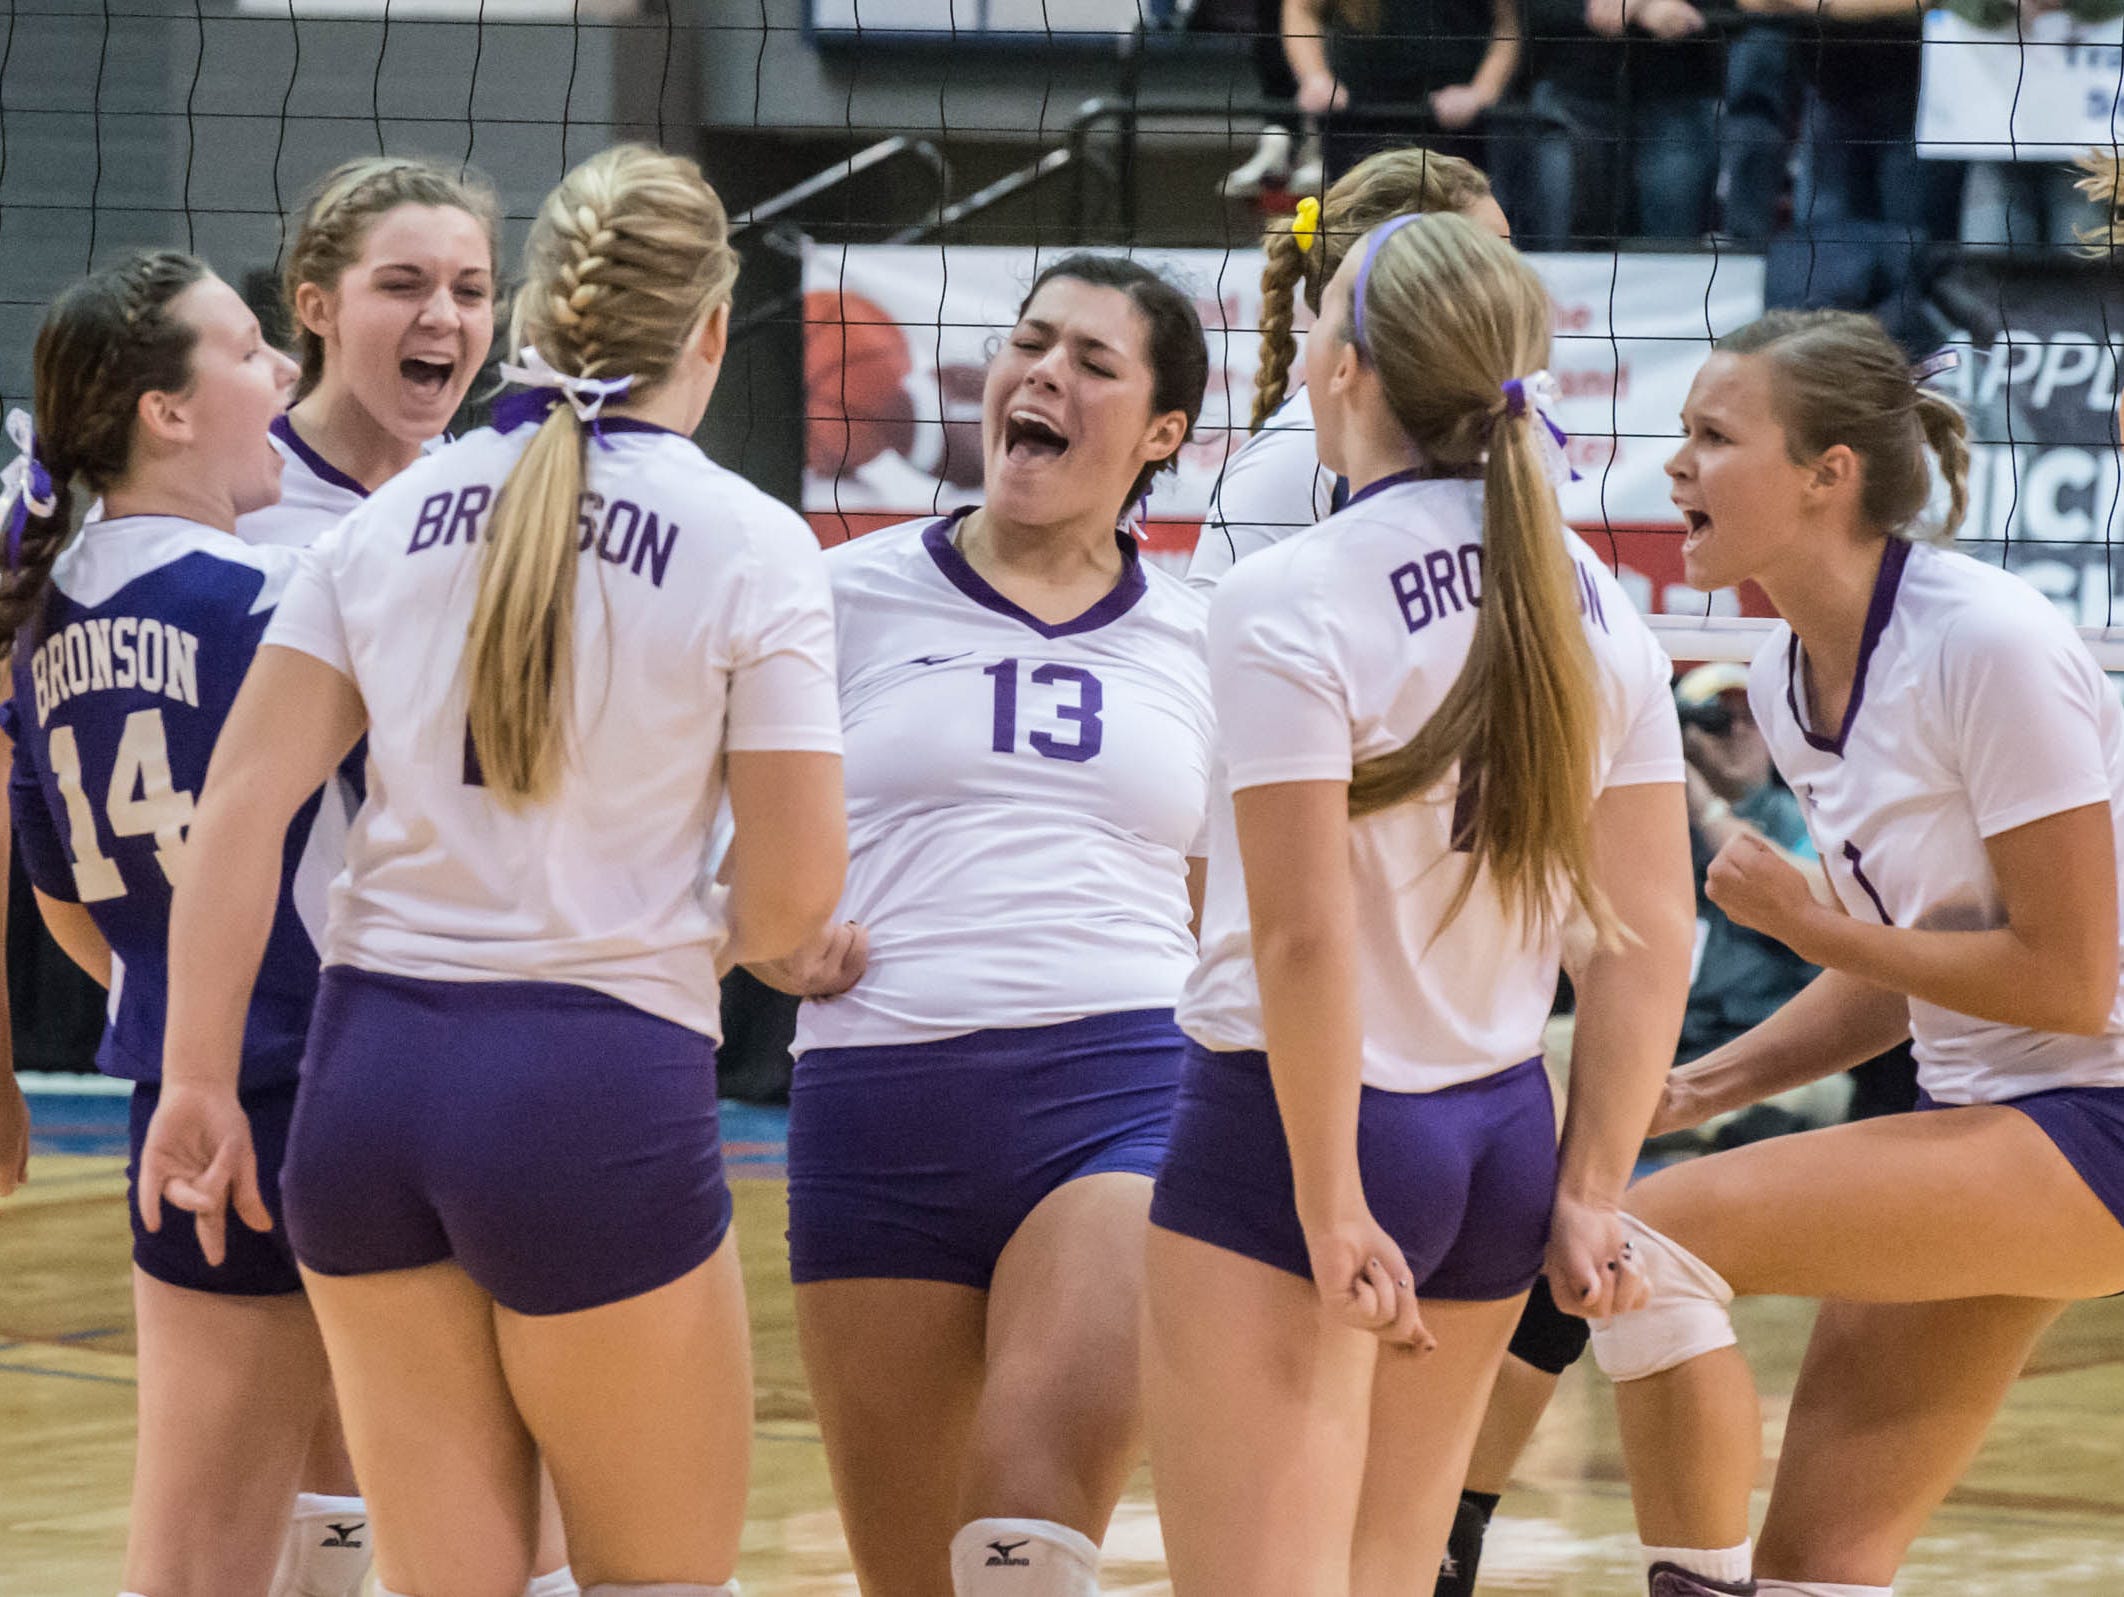 Bronson players celebrate after a point during semi-finals against TC St. Francis.